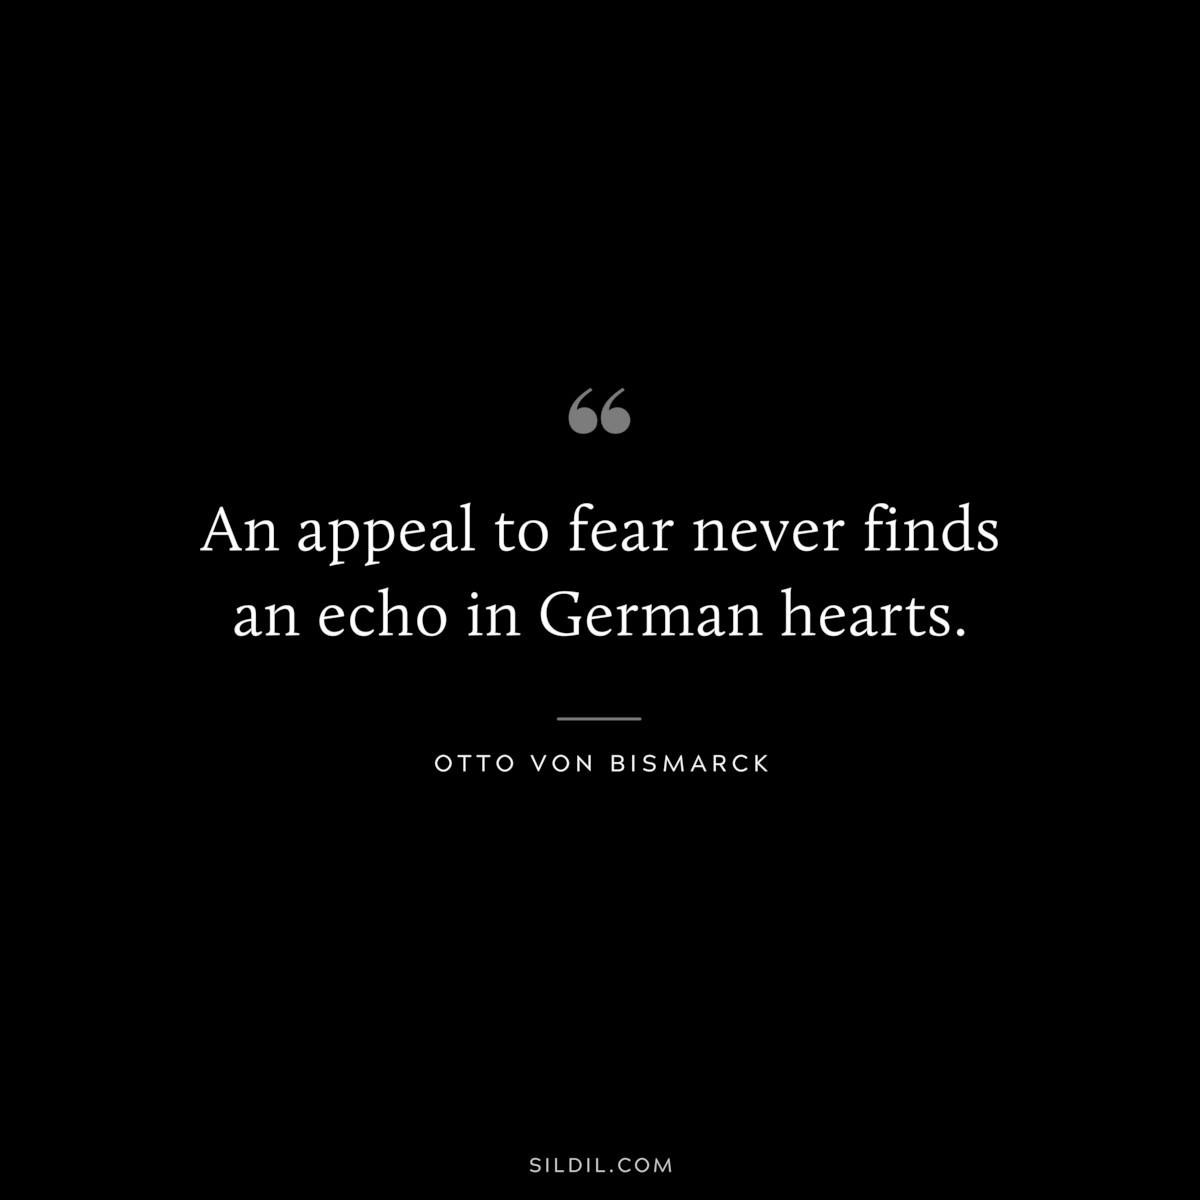 An appeal to fear never finds an echo in German hearts. ― Otto von Bismarck